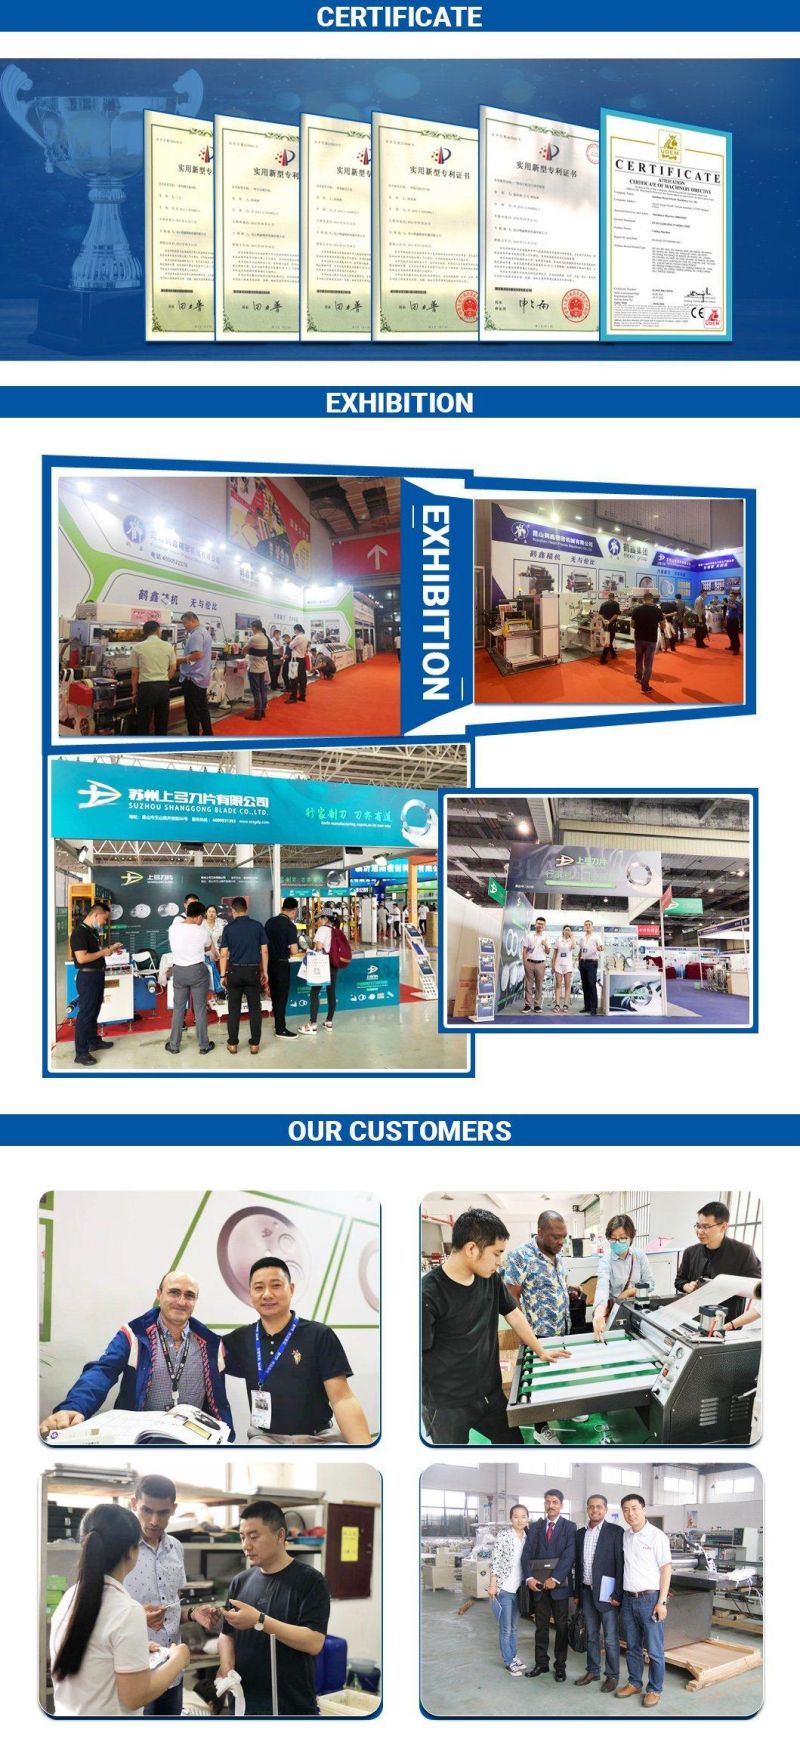 Overseas Service Provided Electrical Products Flat Die Cutting Machine